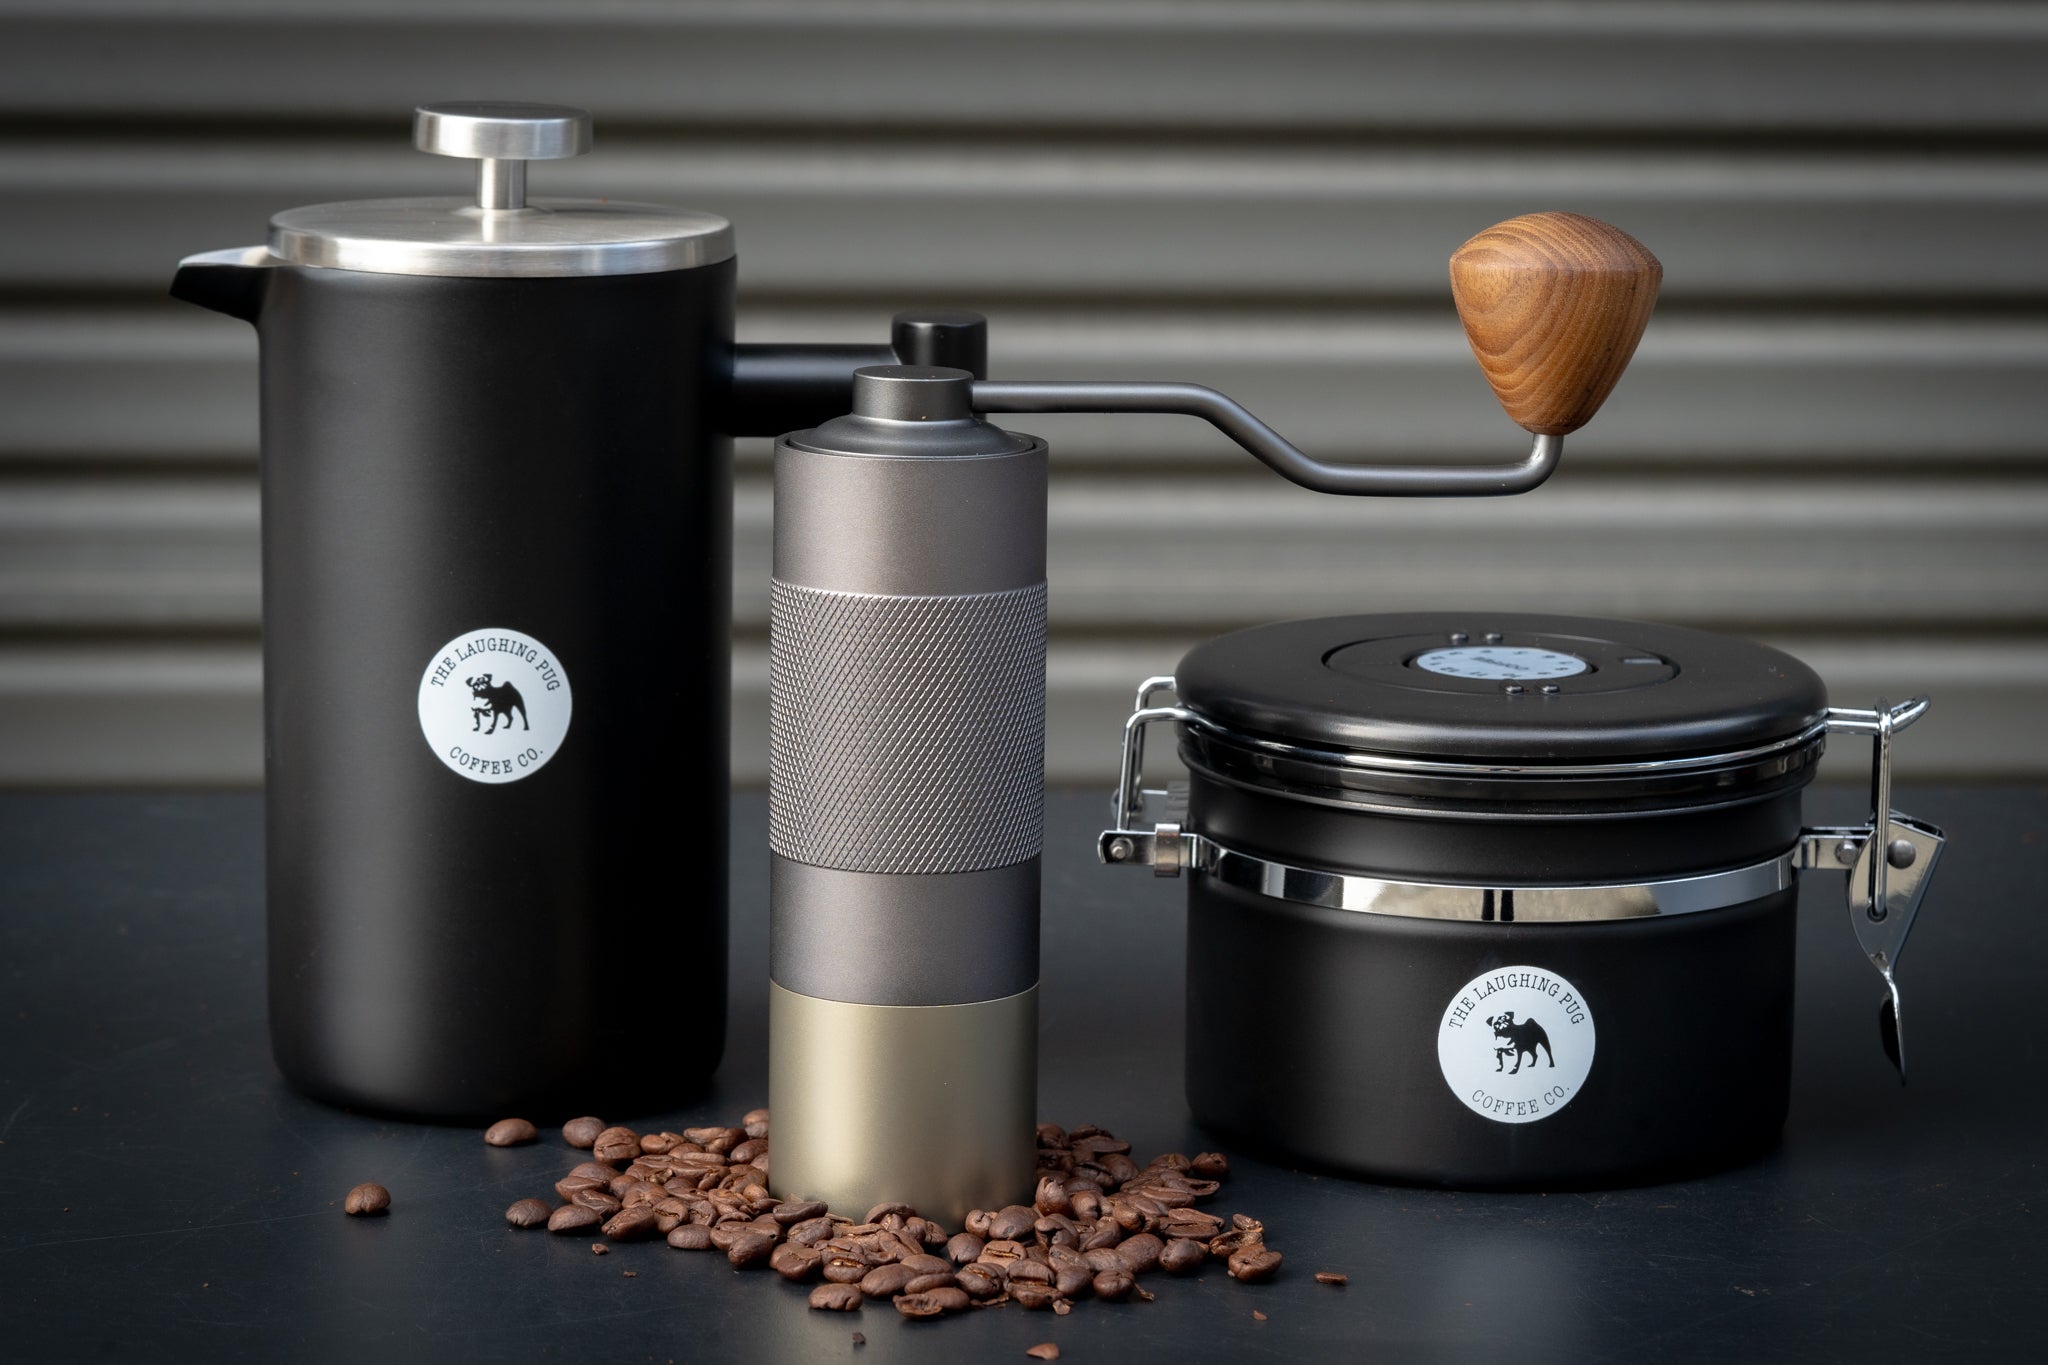 The Ultimate Coffee Kit